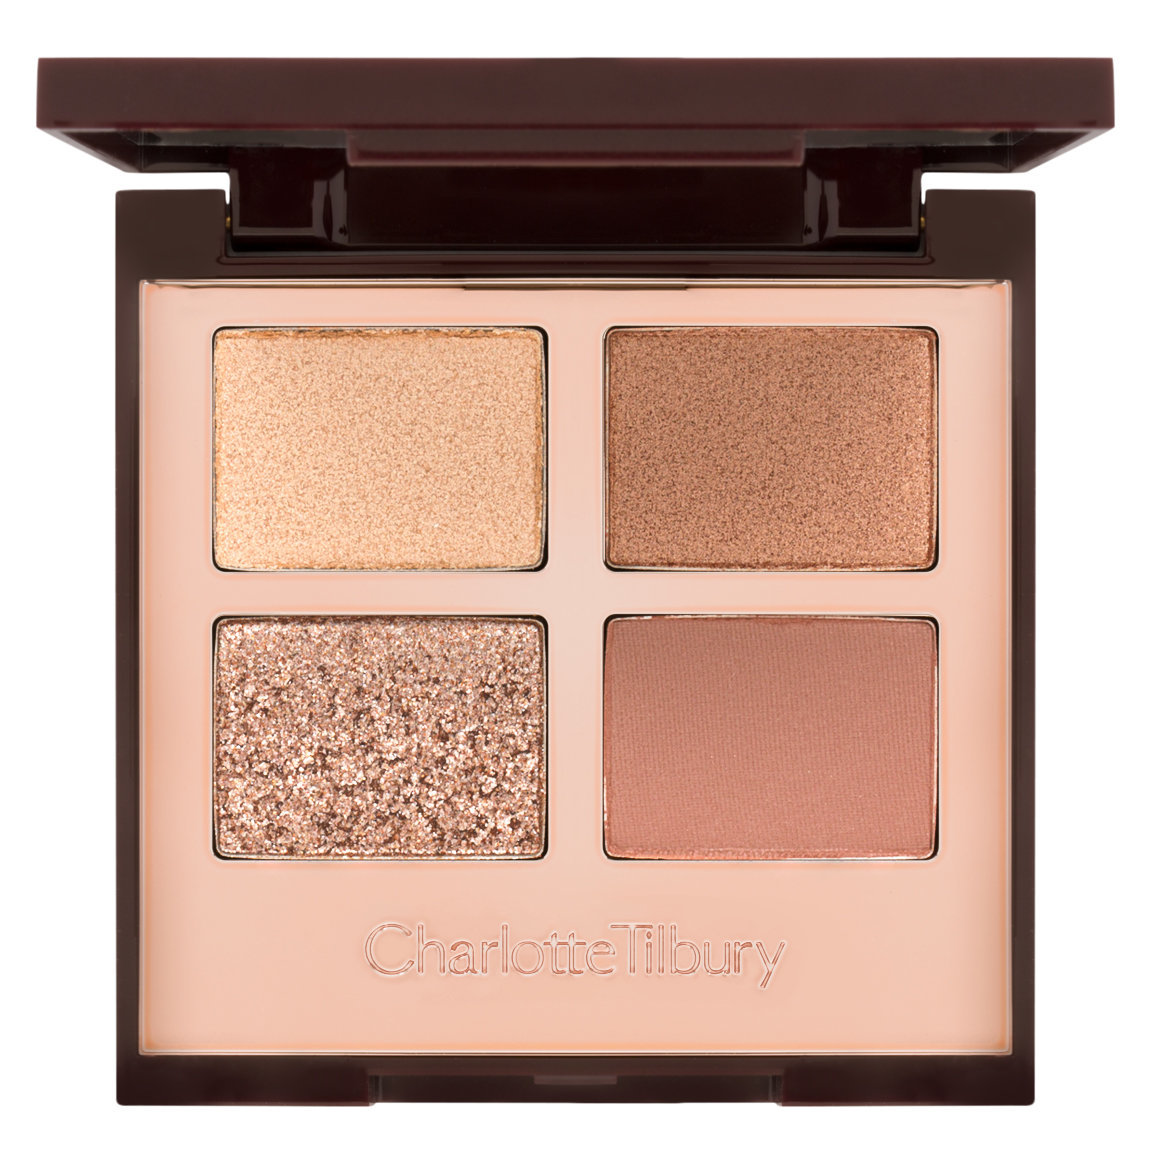 Charlotte Tilbury Bigger Brighter Eyes Filter Exaggereyes alternative view 1 - product swatch.